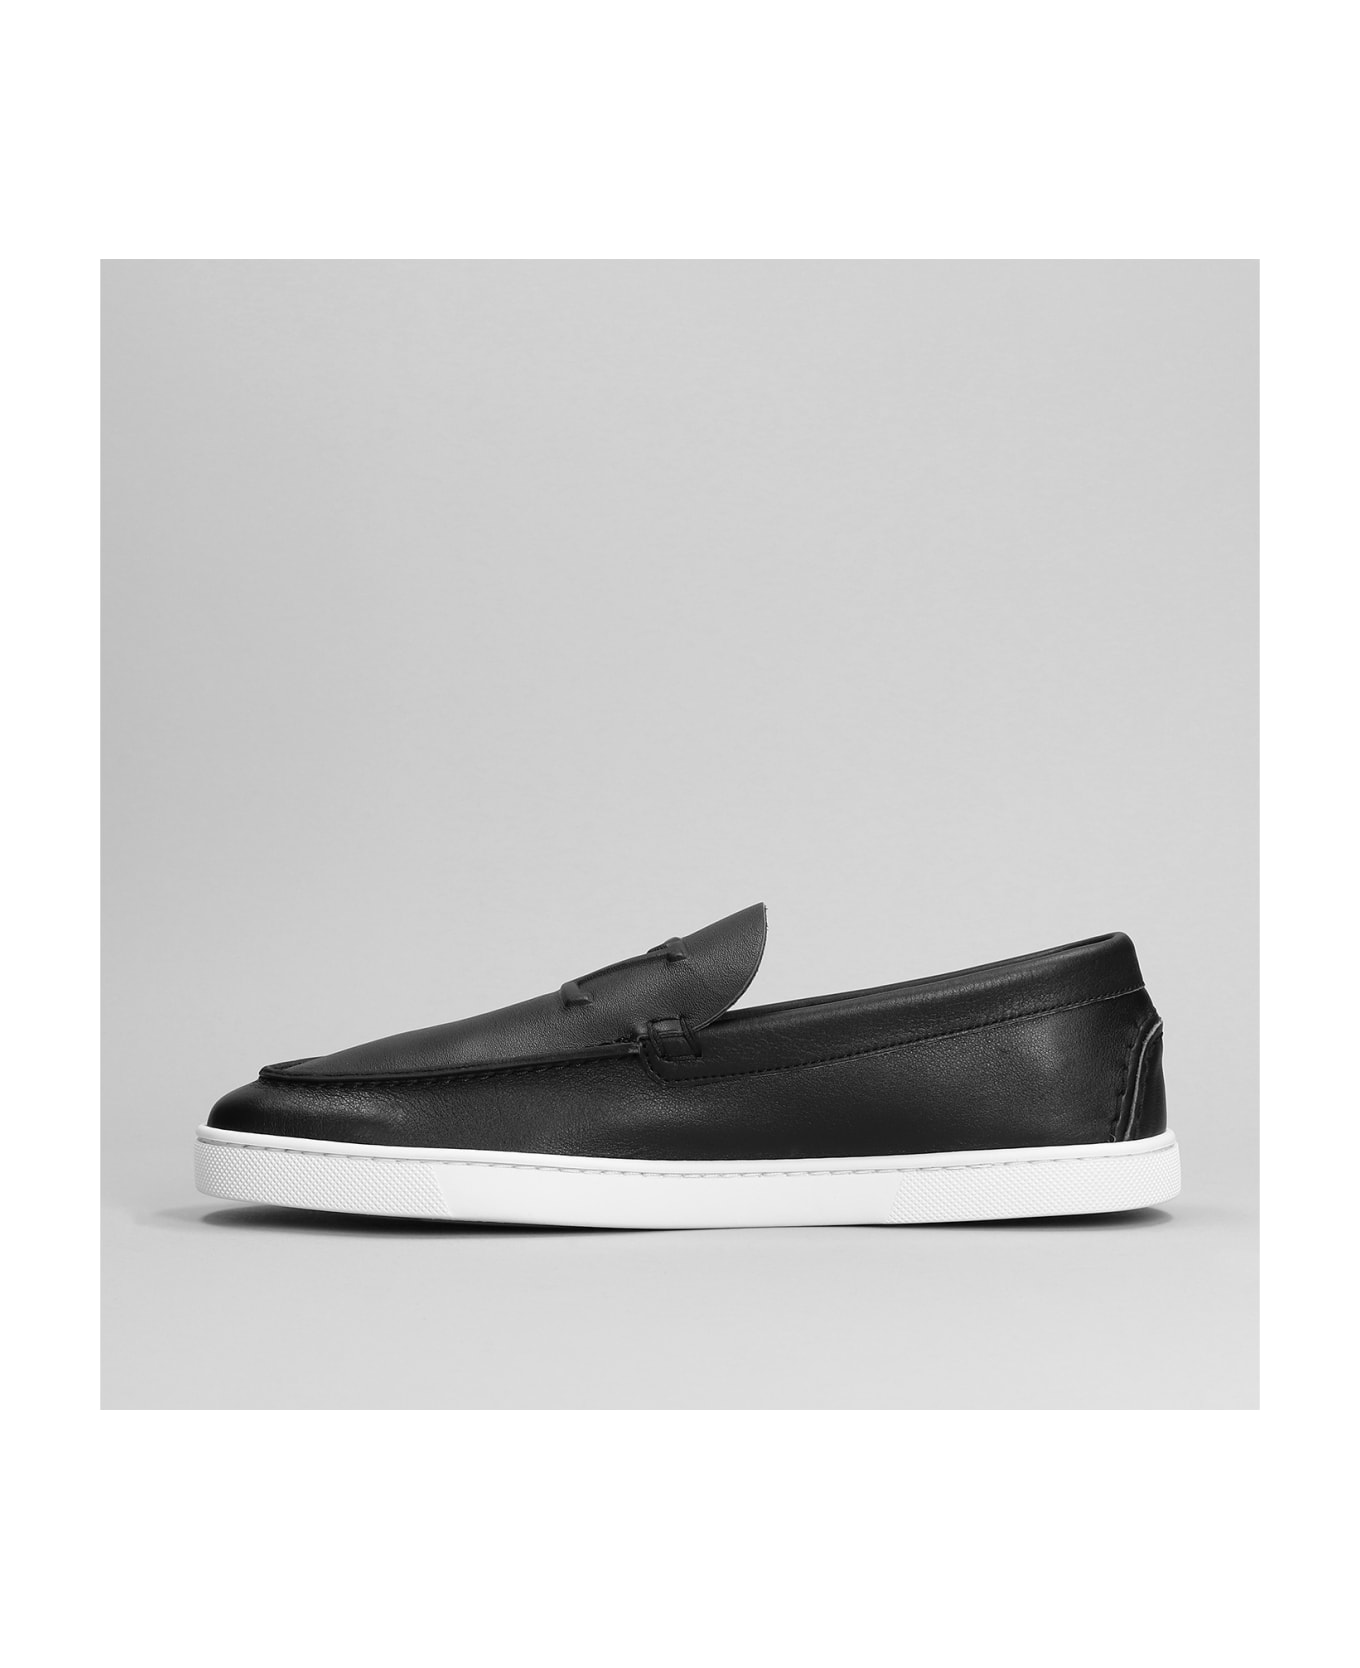 Christian Louboutin Varsiboat Loafers In Black Leather - black ローファー＆デッキシューズ